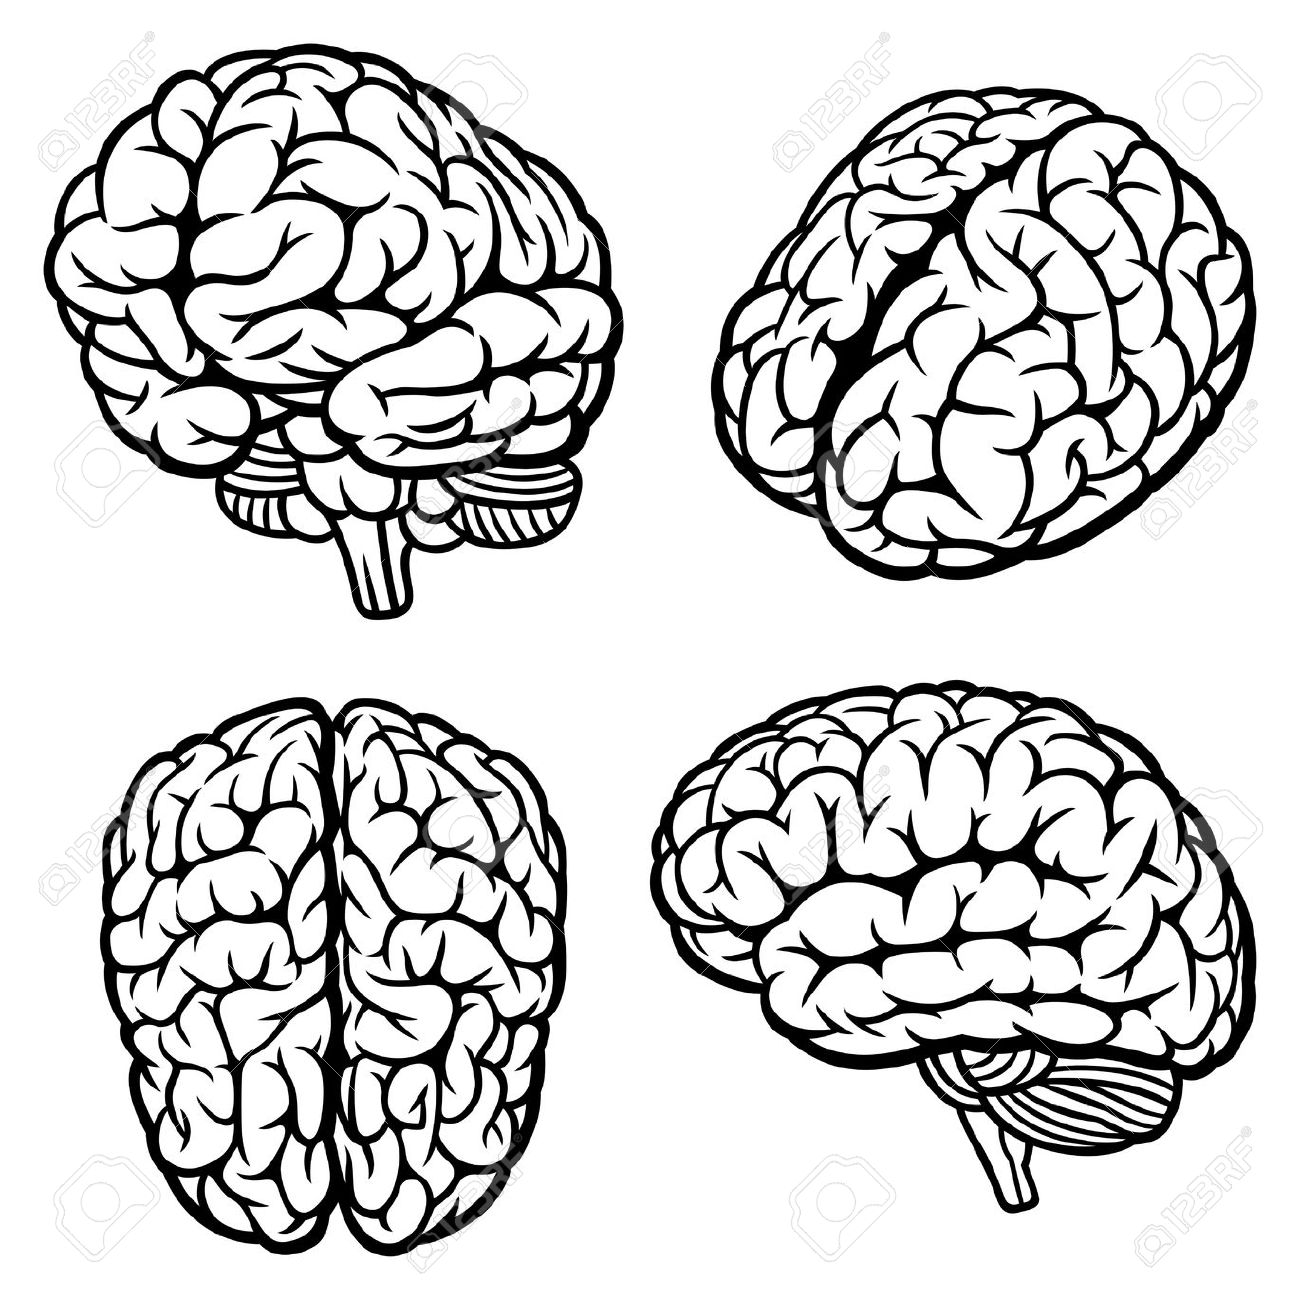 brain outline clipart black and white forward - Clipground